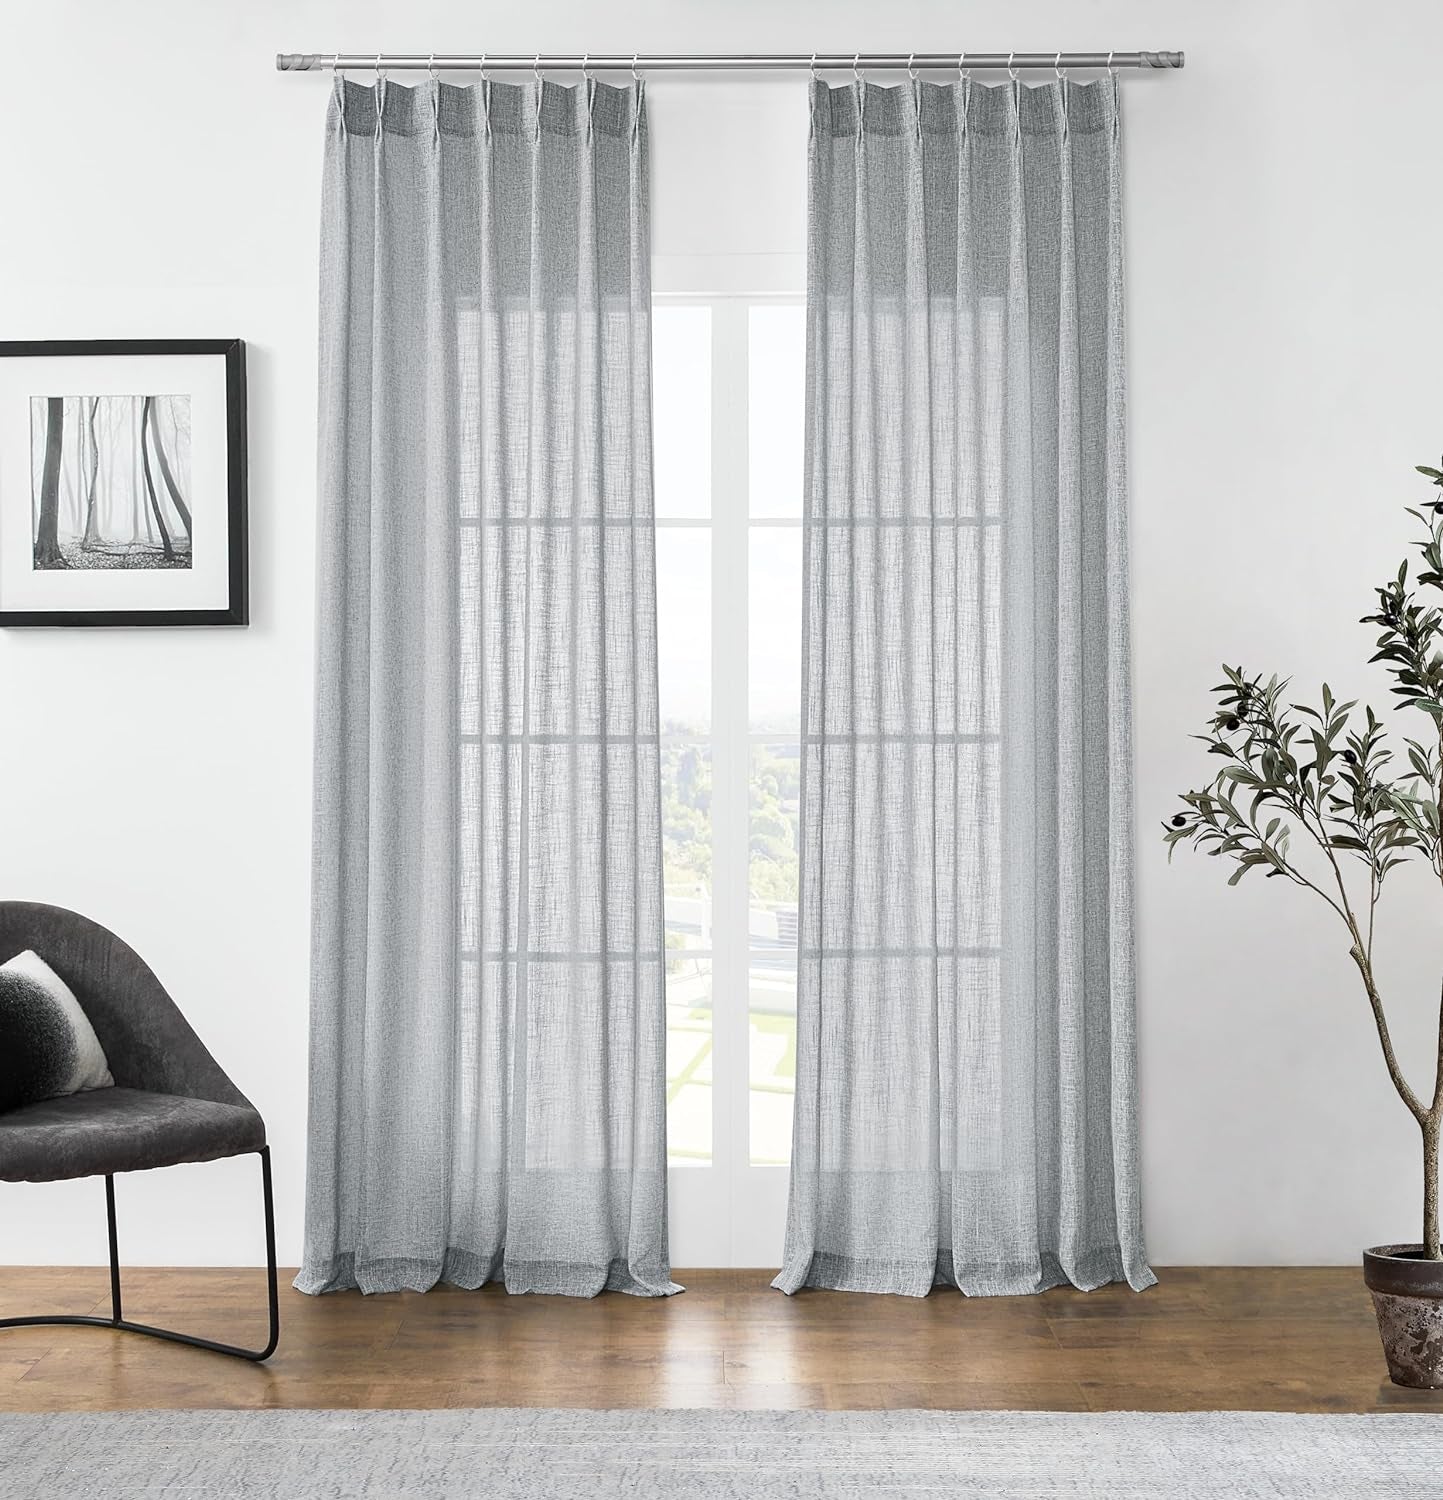 Central Park White Pinch Pleat Sheer Curtain 108 Inches Extra Long Textured Farmhouse Window Treatment Drapery Sets for Living Room Bedroom, 40"X108"X2  Central Park Gray White/Pinch 40"X84"X2 